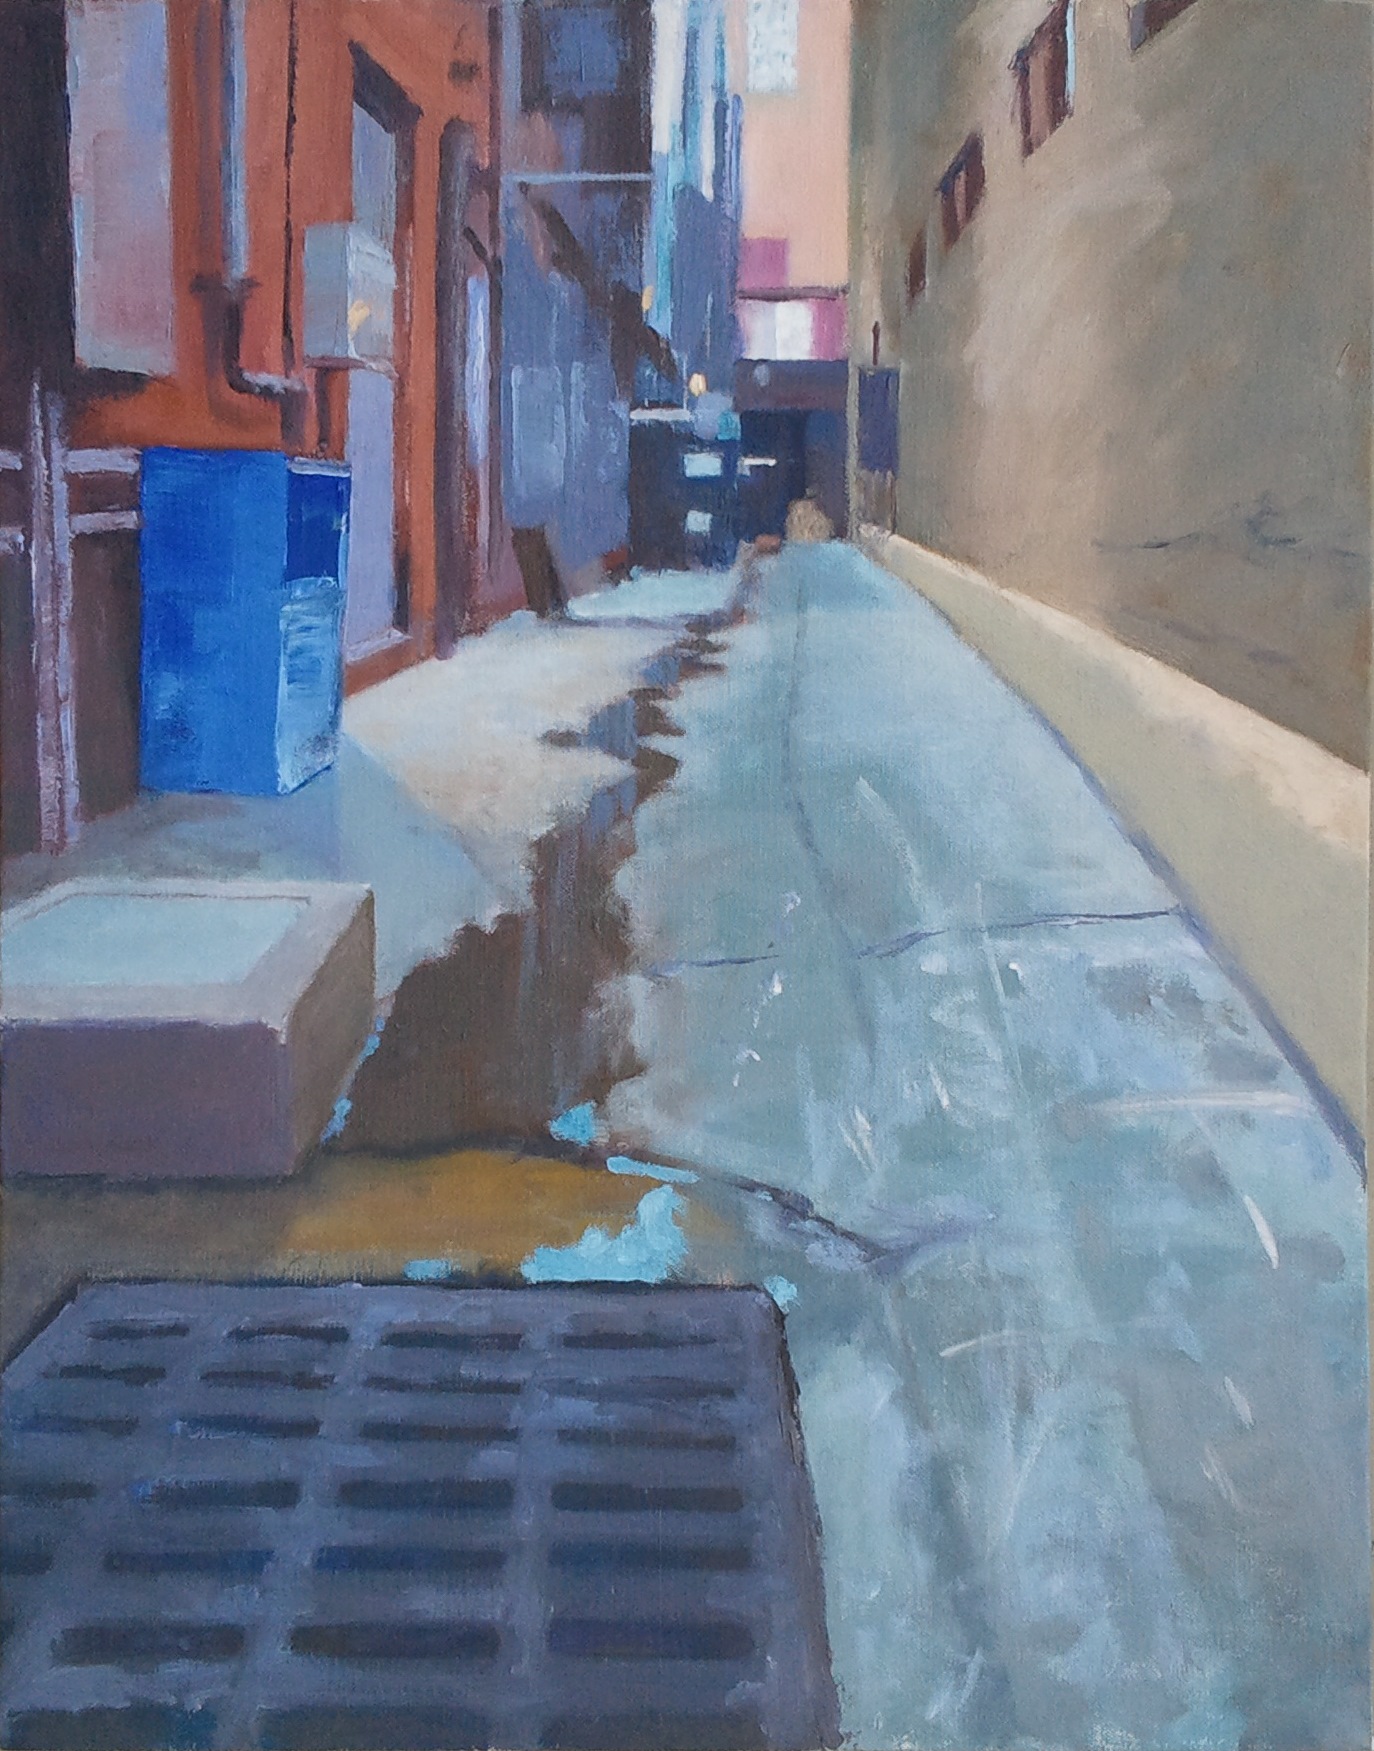  "Alley, Blue Box," 22"x28", oil on canvas (sold) 